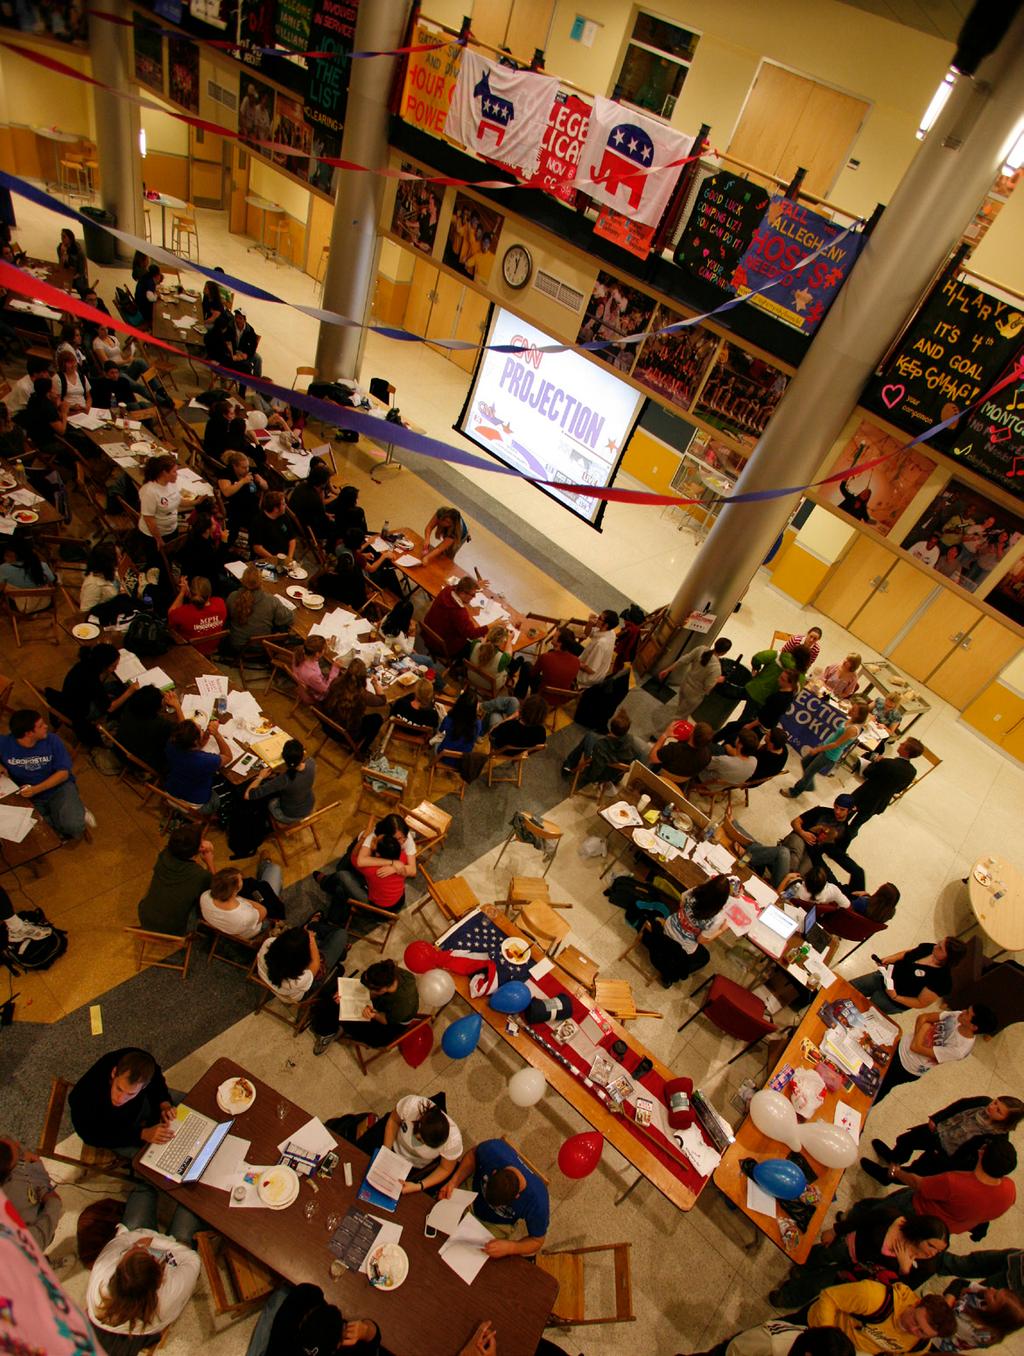 Students and community members gathered in the Henderson Campus Center for the 2008 Election